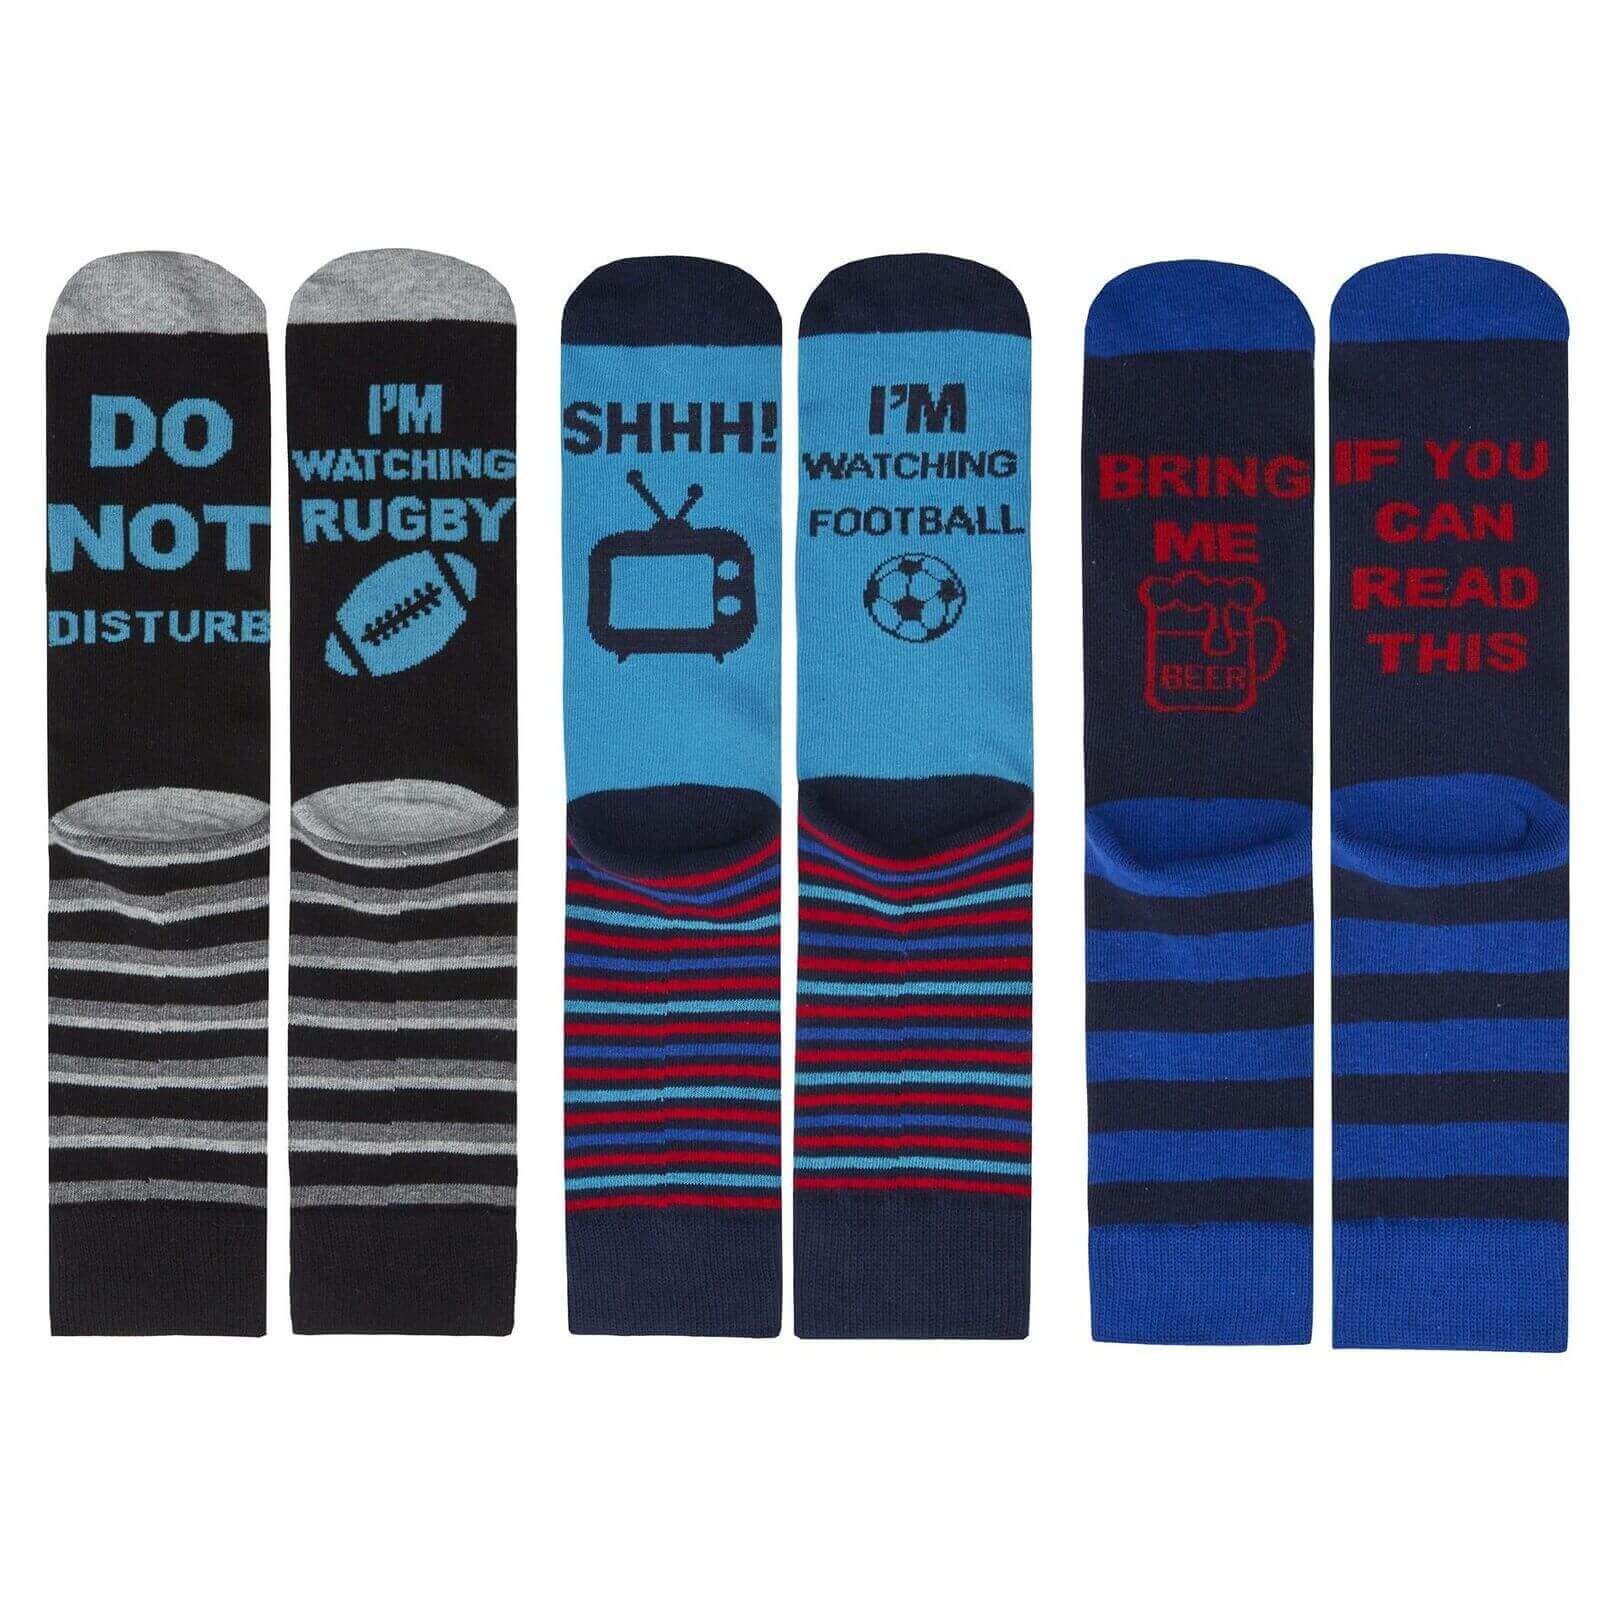 Pack Of 3 Men's Slogan Socks Sole Design Novelty Sock, Football & Rugby. Buy now for £6.00. A Socks by Sock Stack. 6-11, assorted, beer, boot, boys, breathable, comfortable, cosy, cotton, dress socks, football, mens, mens socks, novelty, polyester, rugby,